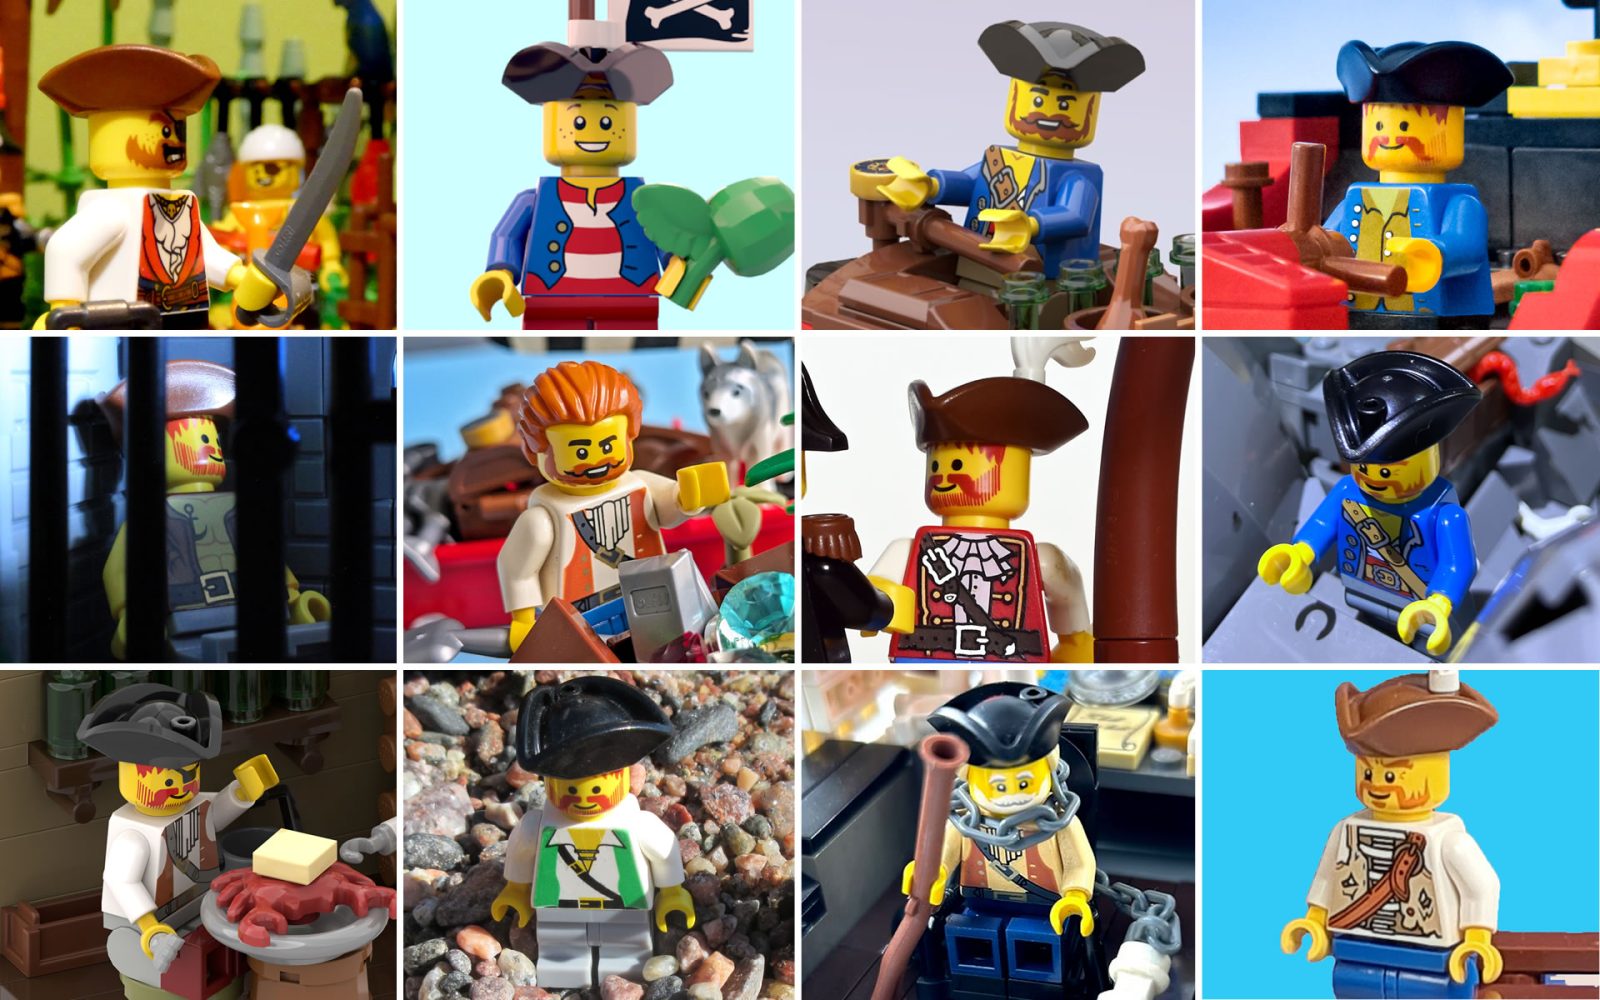 Various versions of Steve without the official minifigure